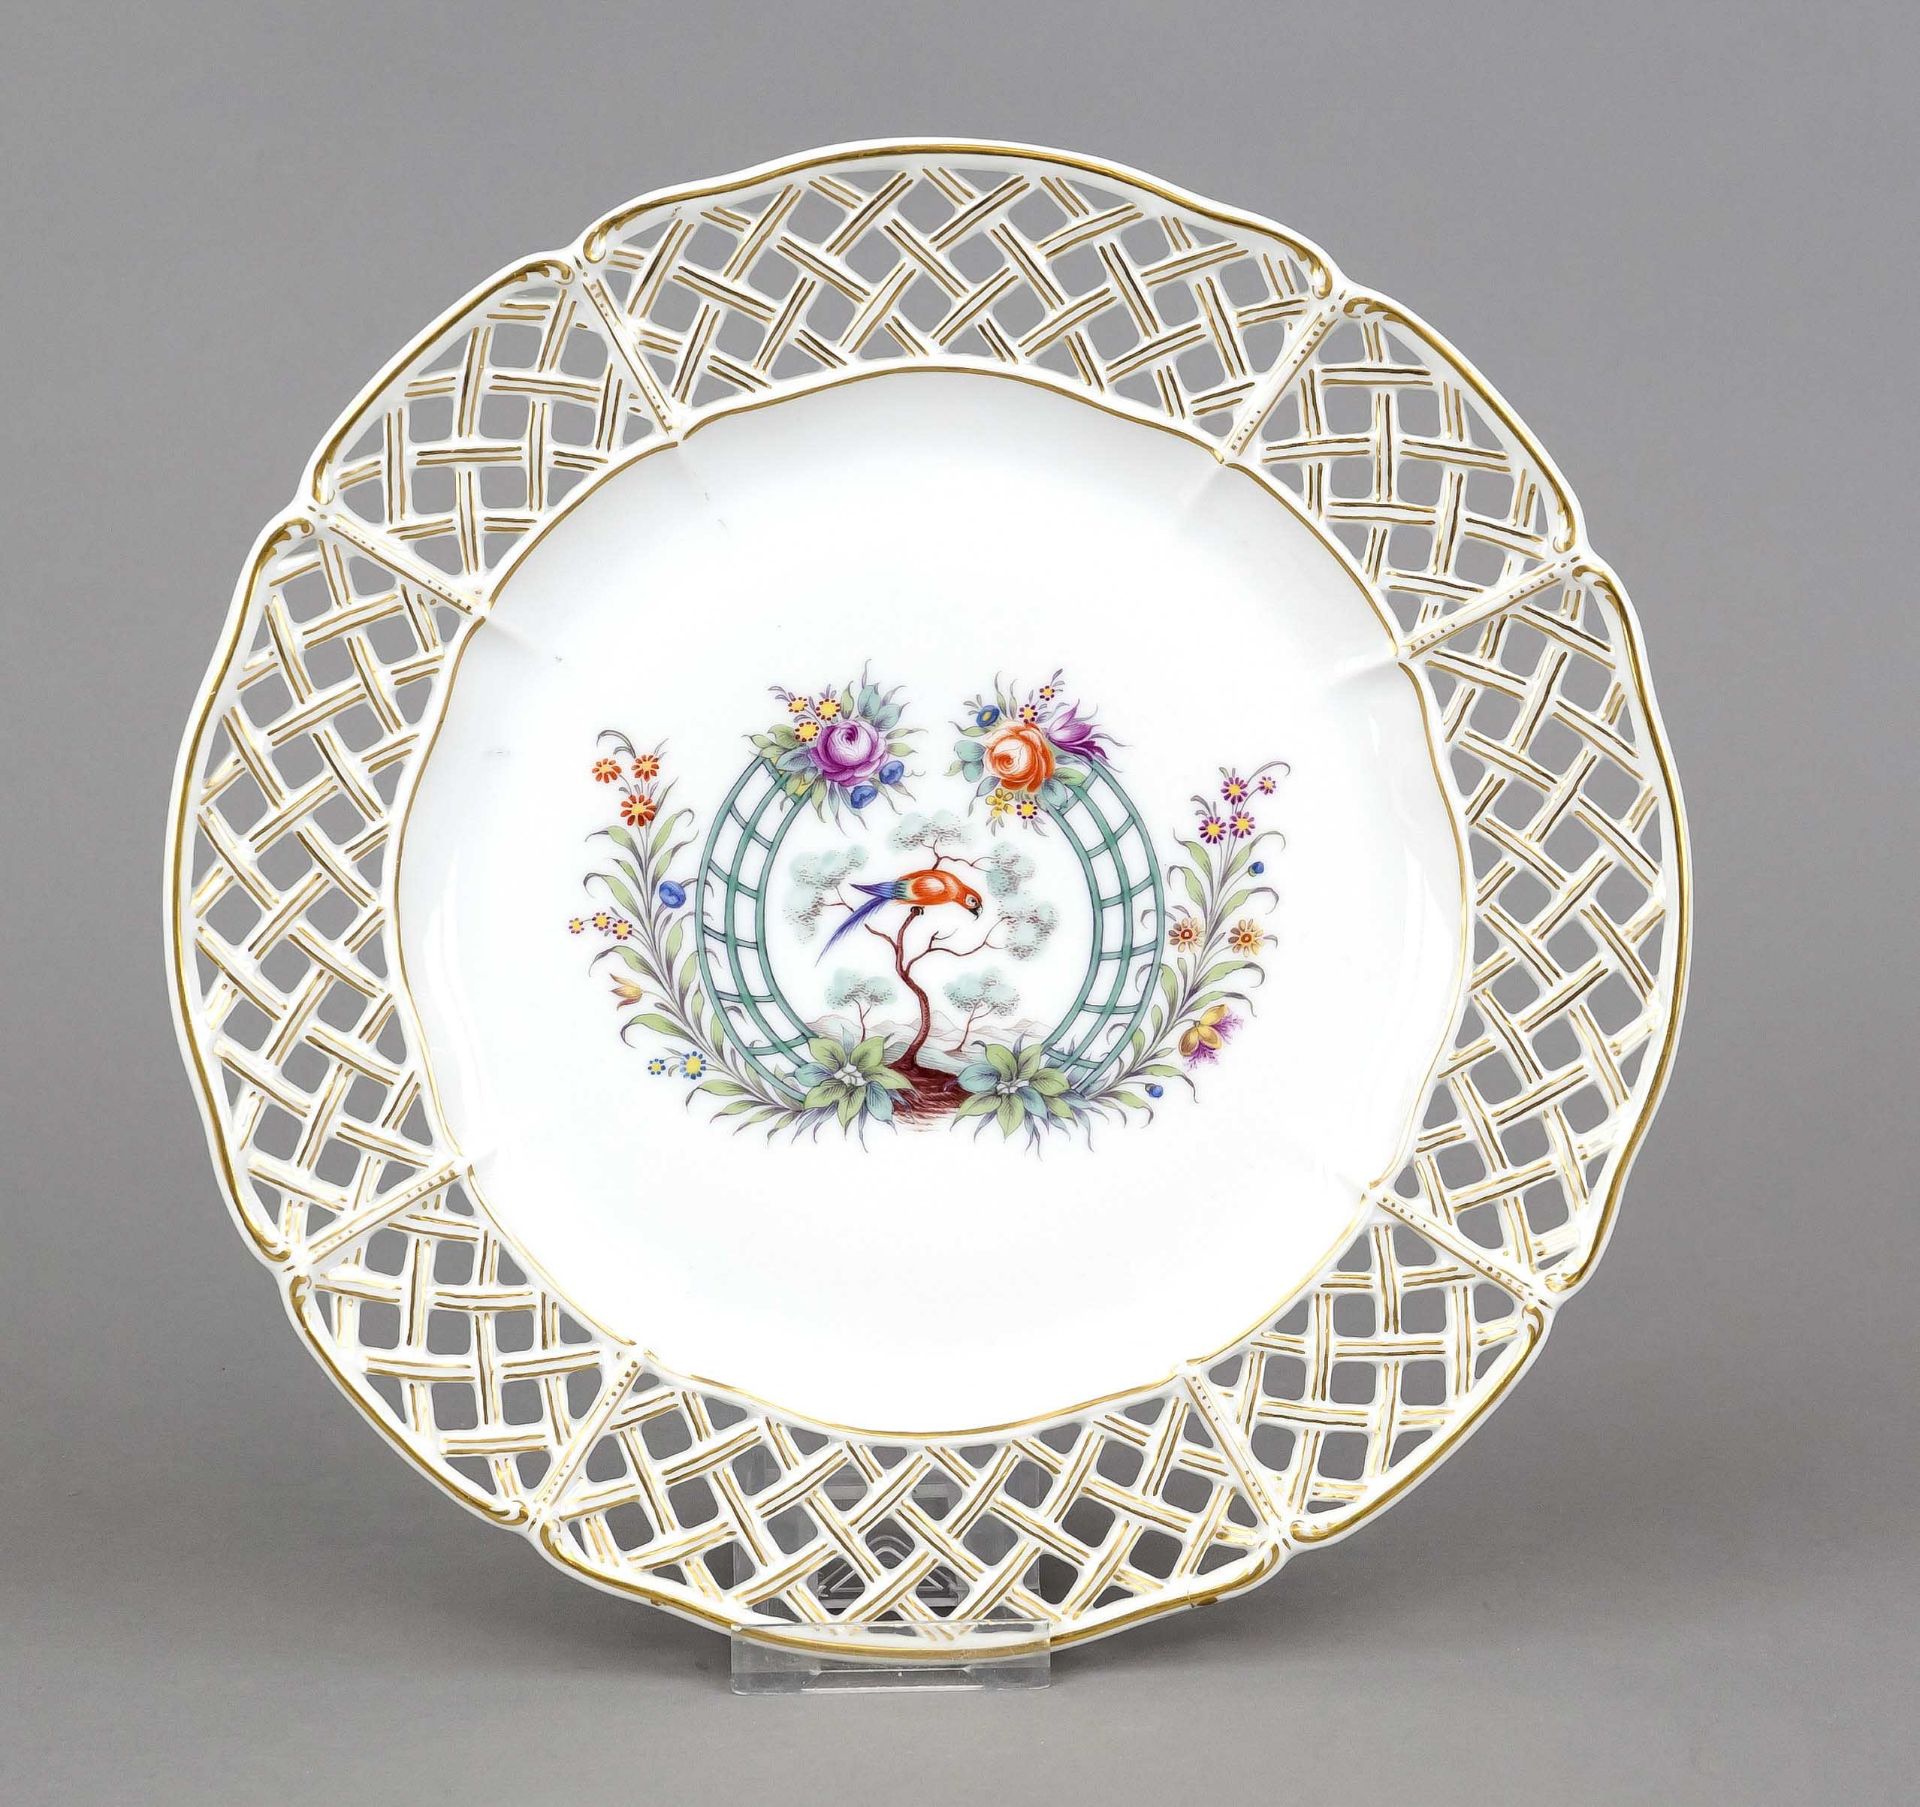 Breakthrough plate, Nymphenburg, mark 1910-75, polychrome painting with exotic bird in stylized